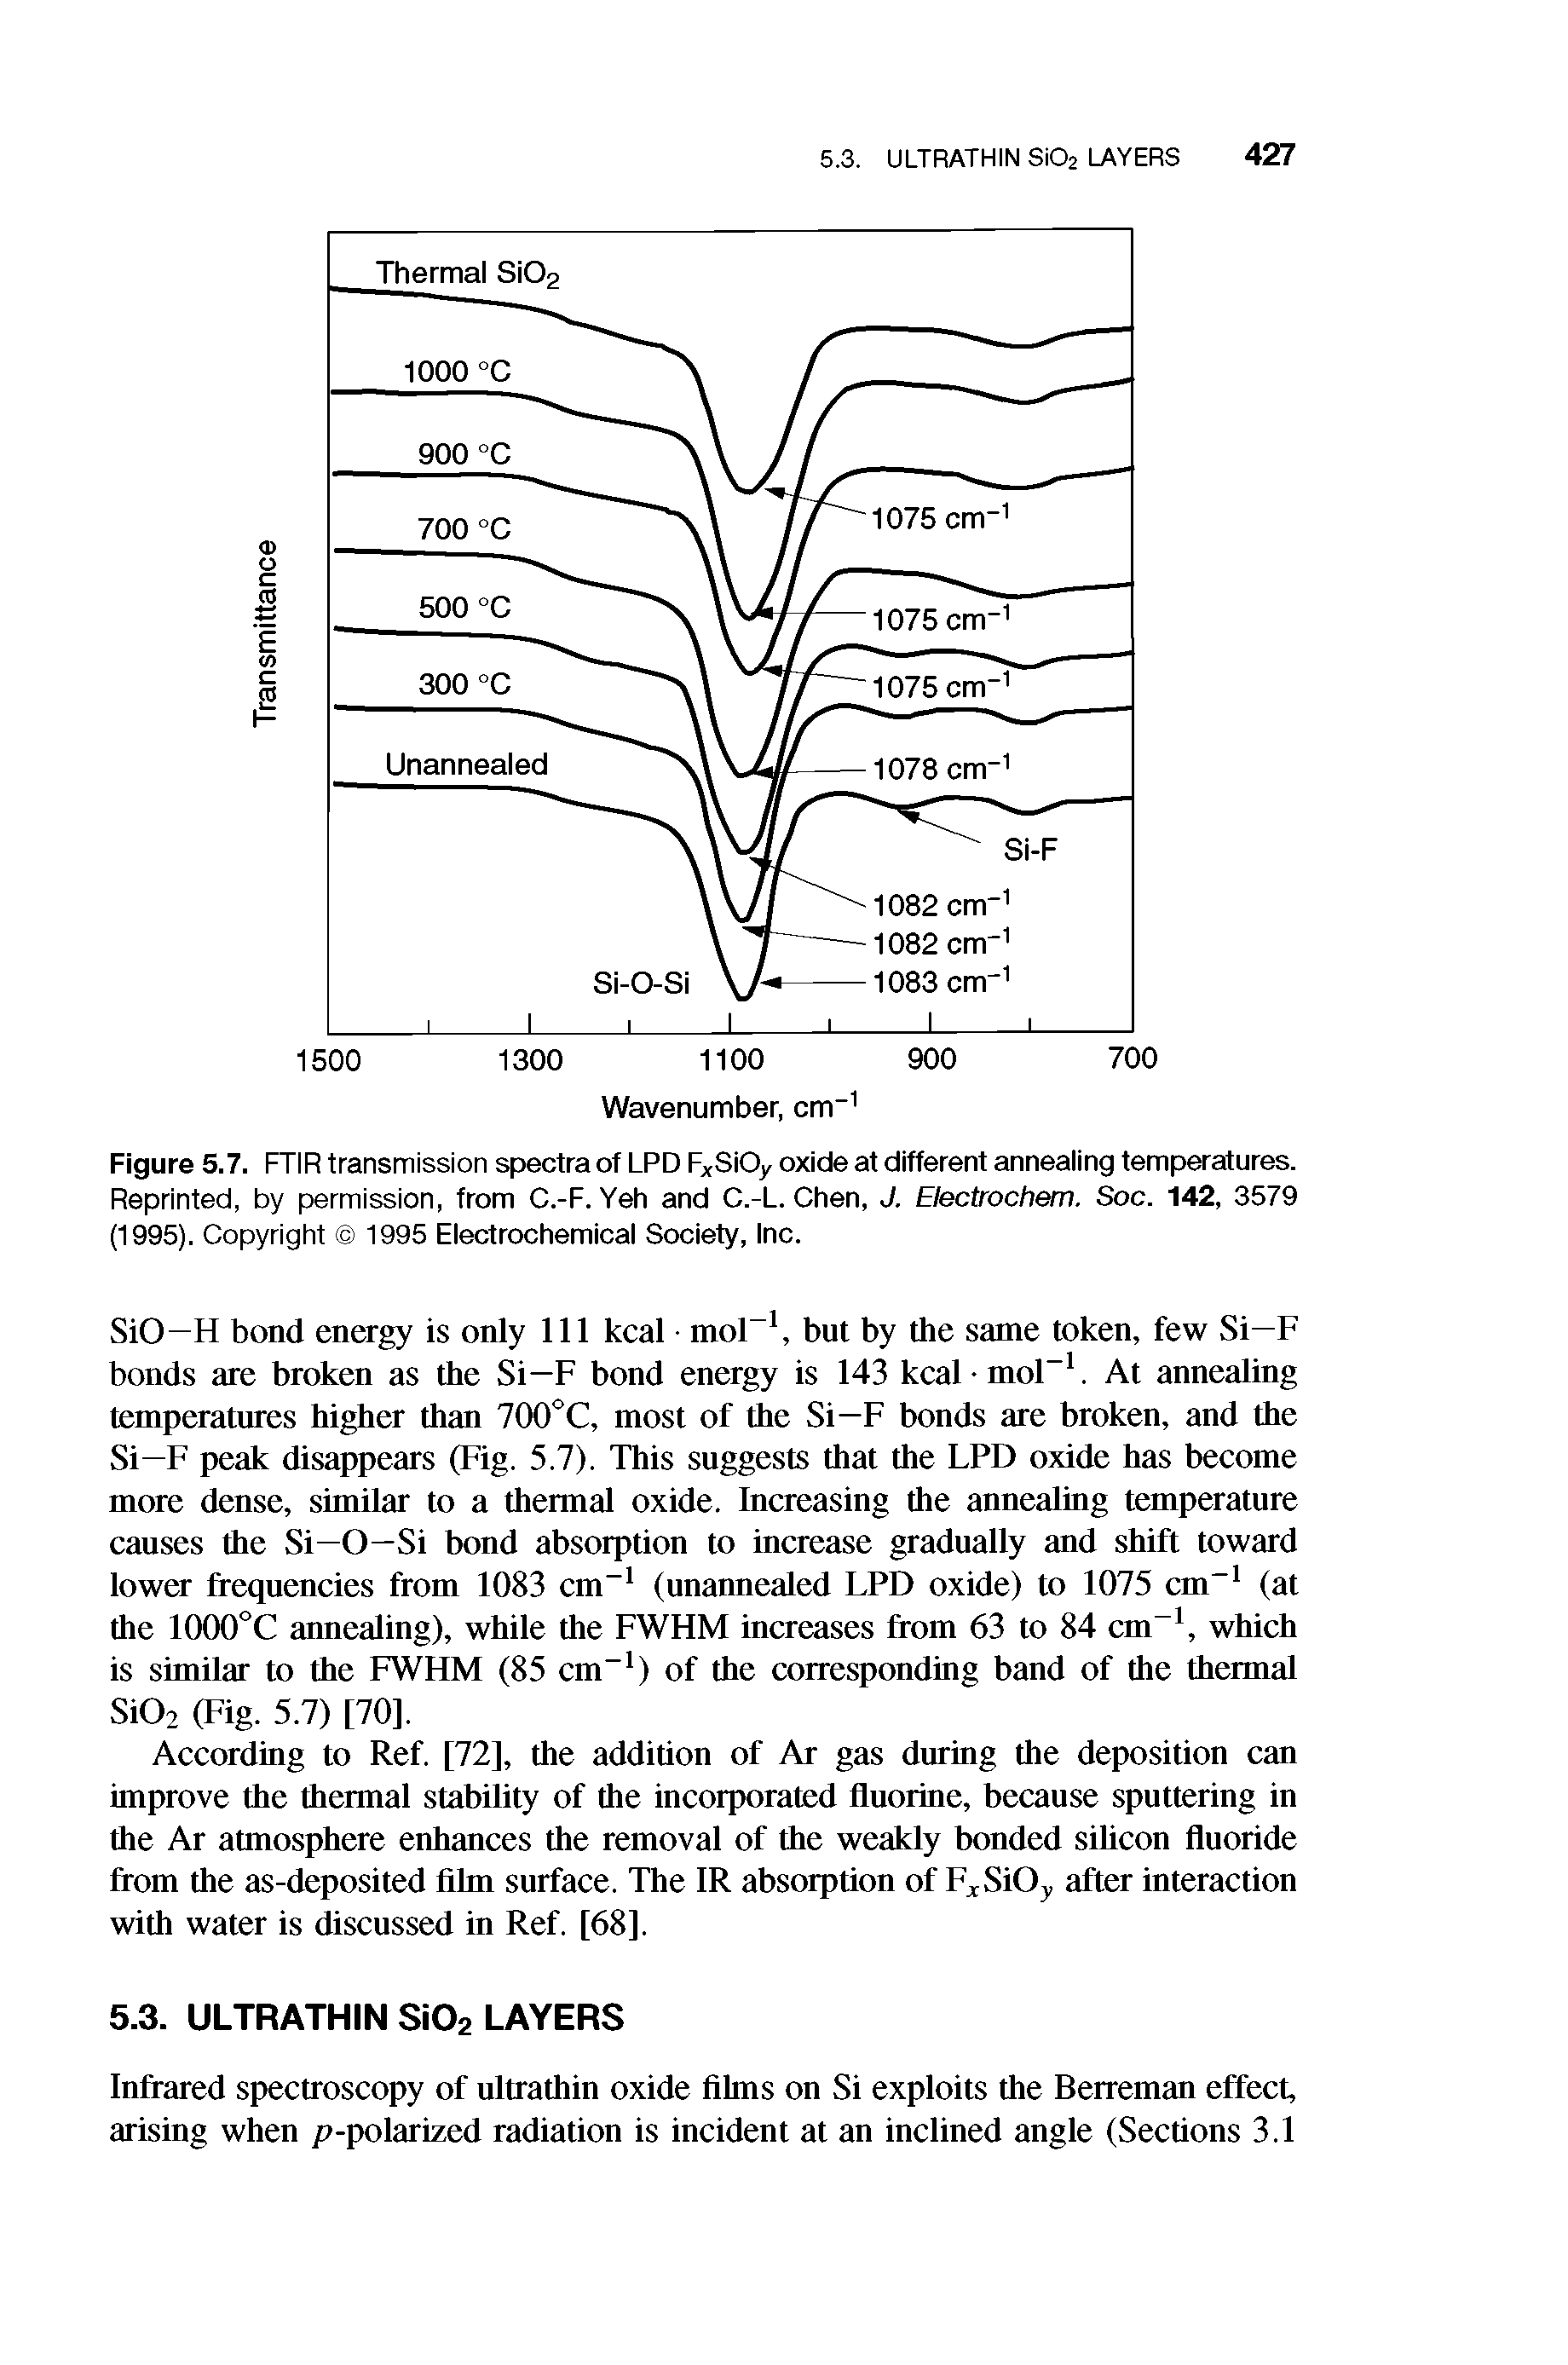 Figure 5.7. FTIR transmission spectra of LPDFxSiOy oxide at different annealing temperatures. Reprinted, by permission, from C.-F. Yeh and C.-L. Chen, J. Electrochem. Soc. 142, 3579 (1995). Copyright 1995 Electrochemical Society, Inc.